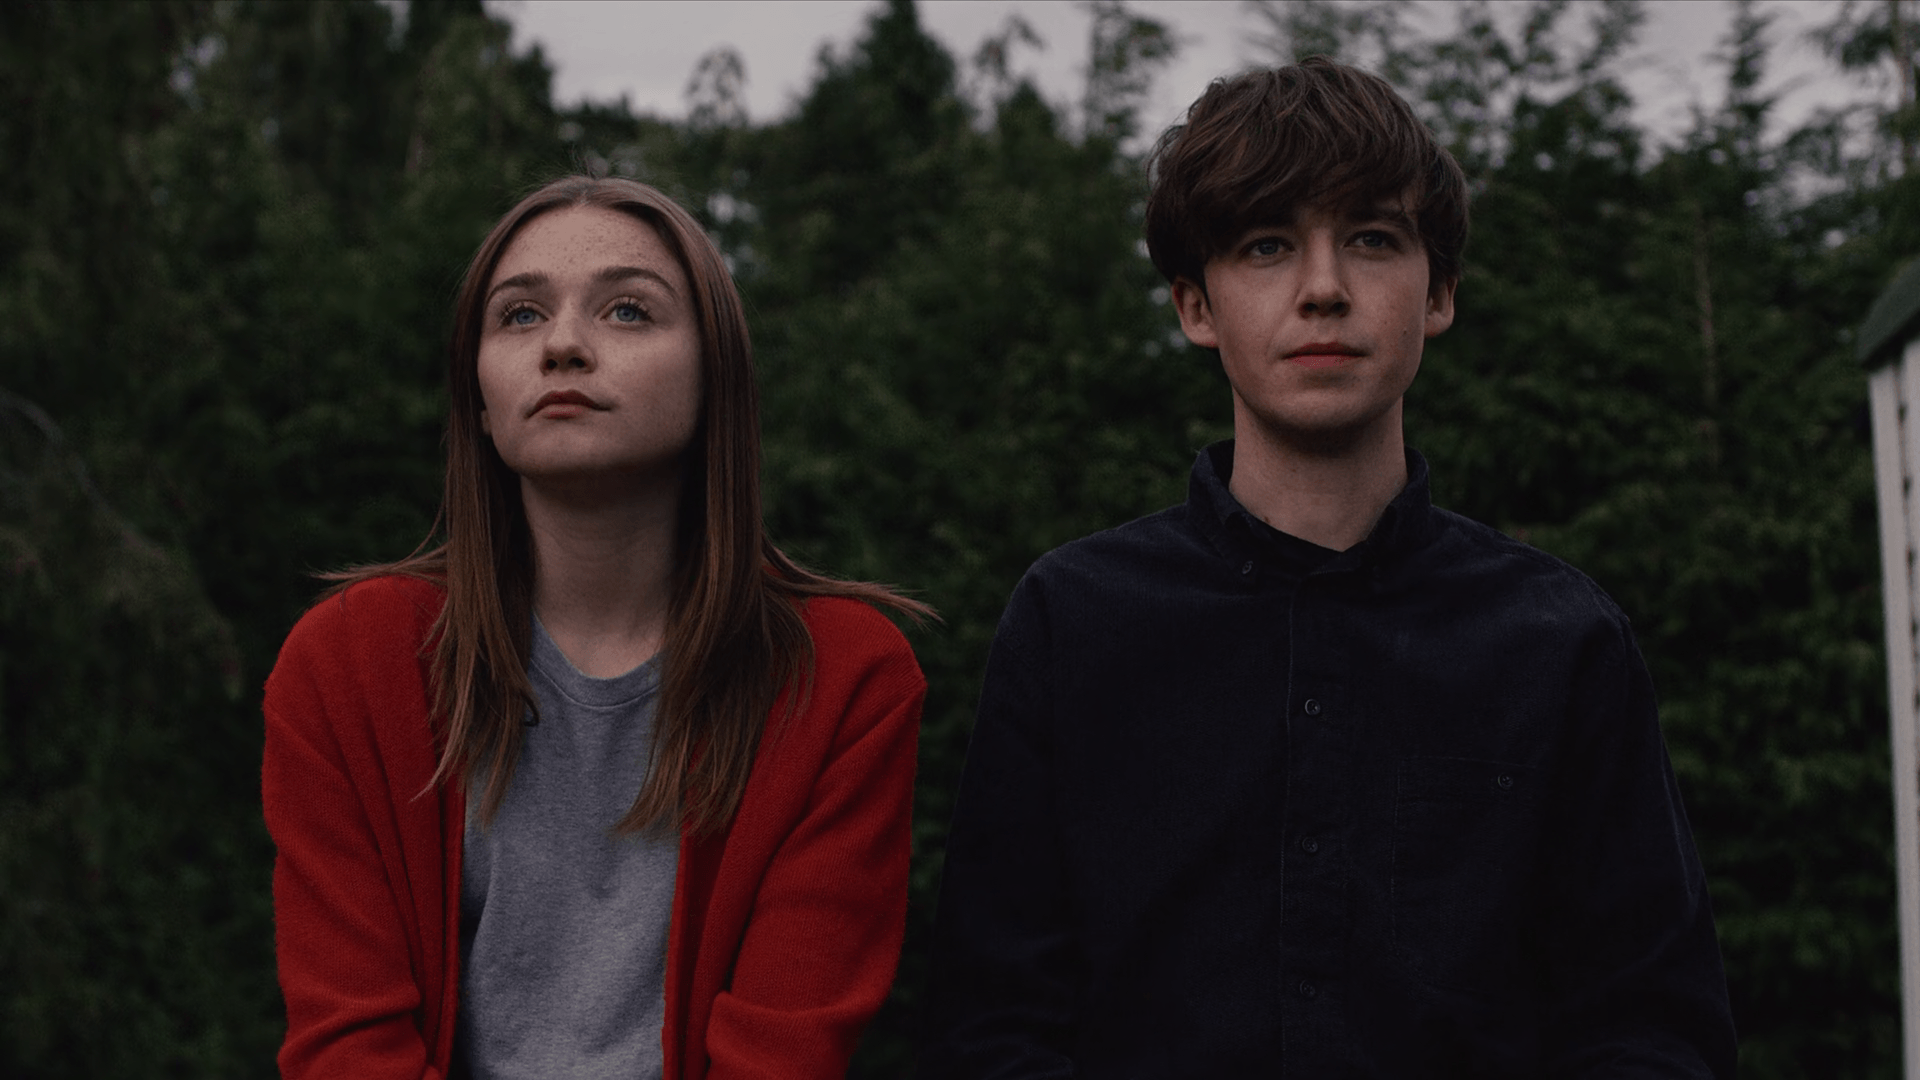 The end of the f***ing world: adorables psicópatas I Series I A La